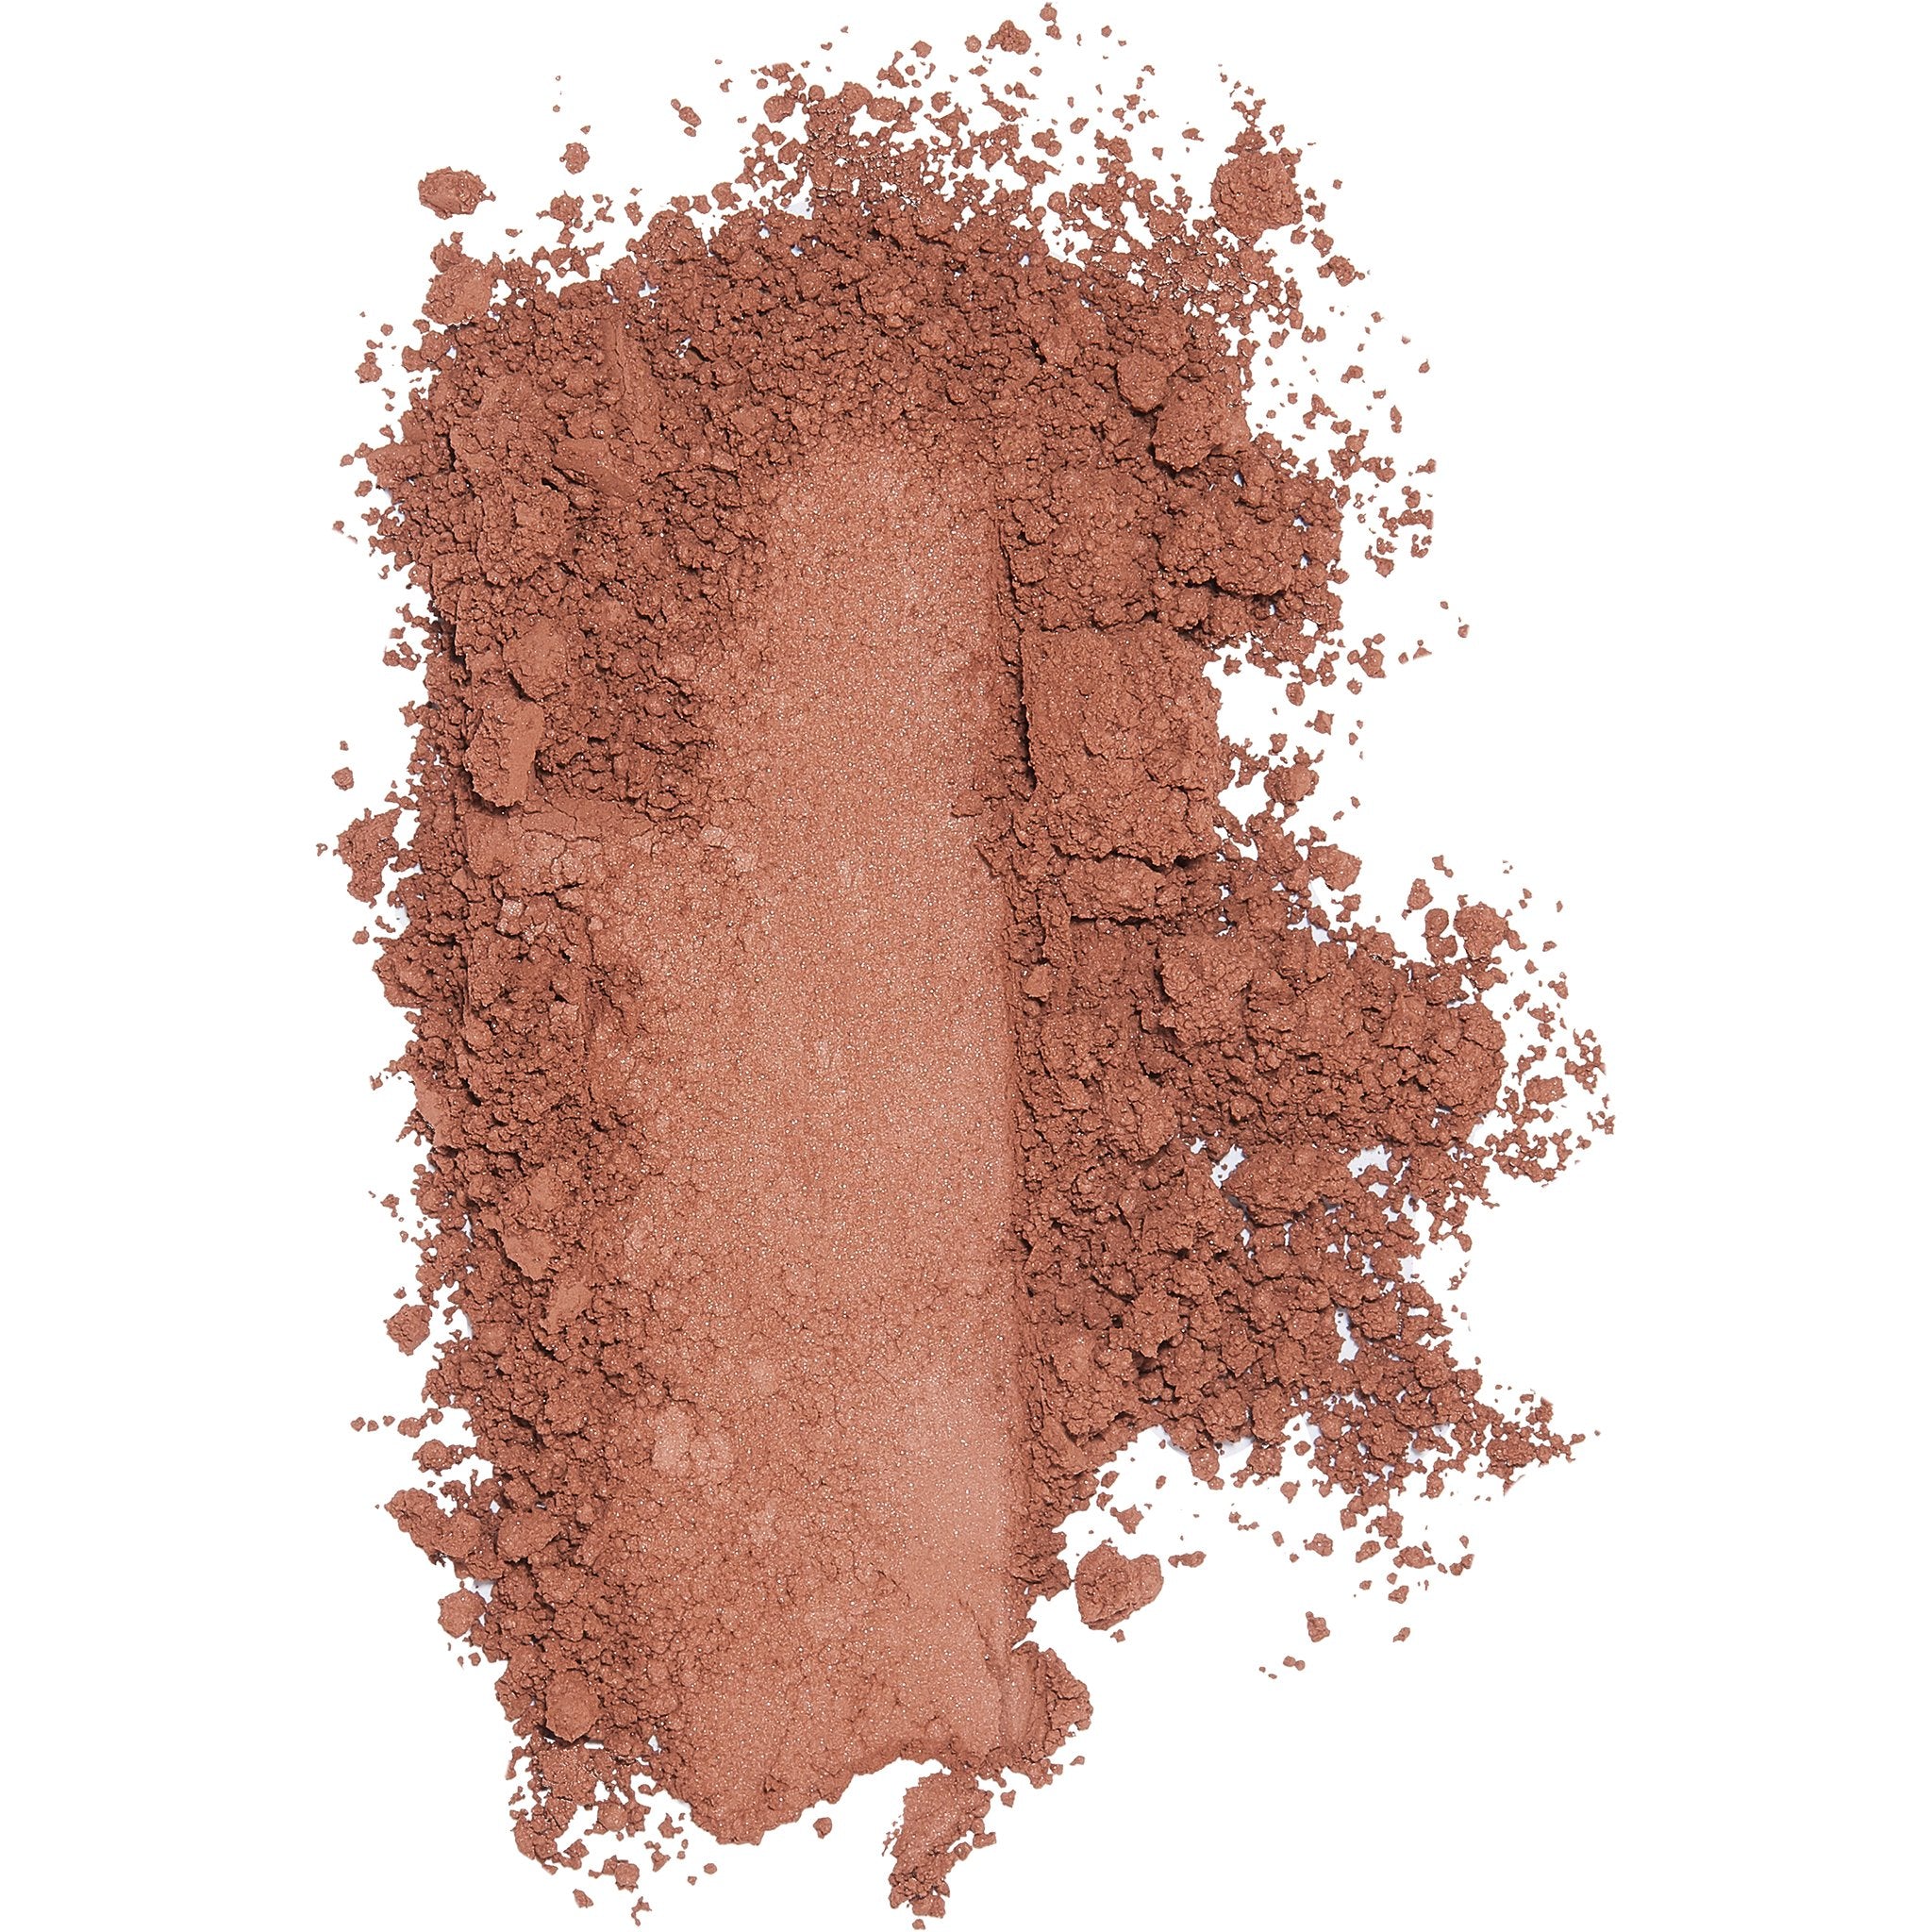 Mineral Foundation SPF 15 - mypure.co.uk